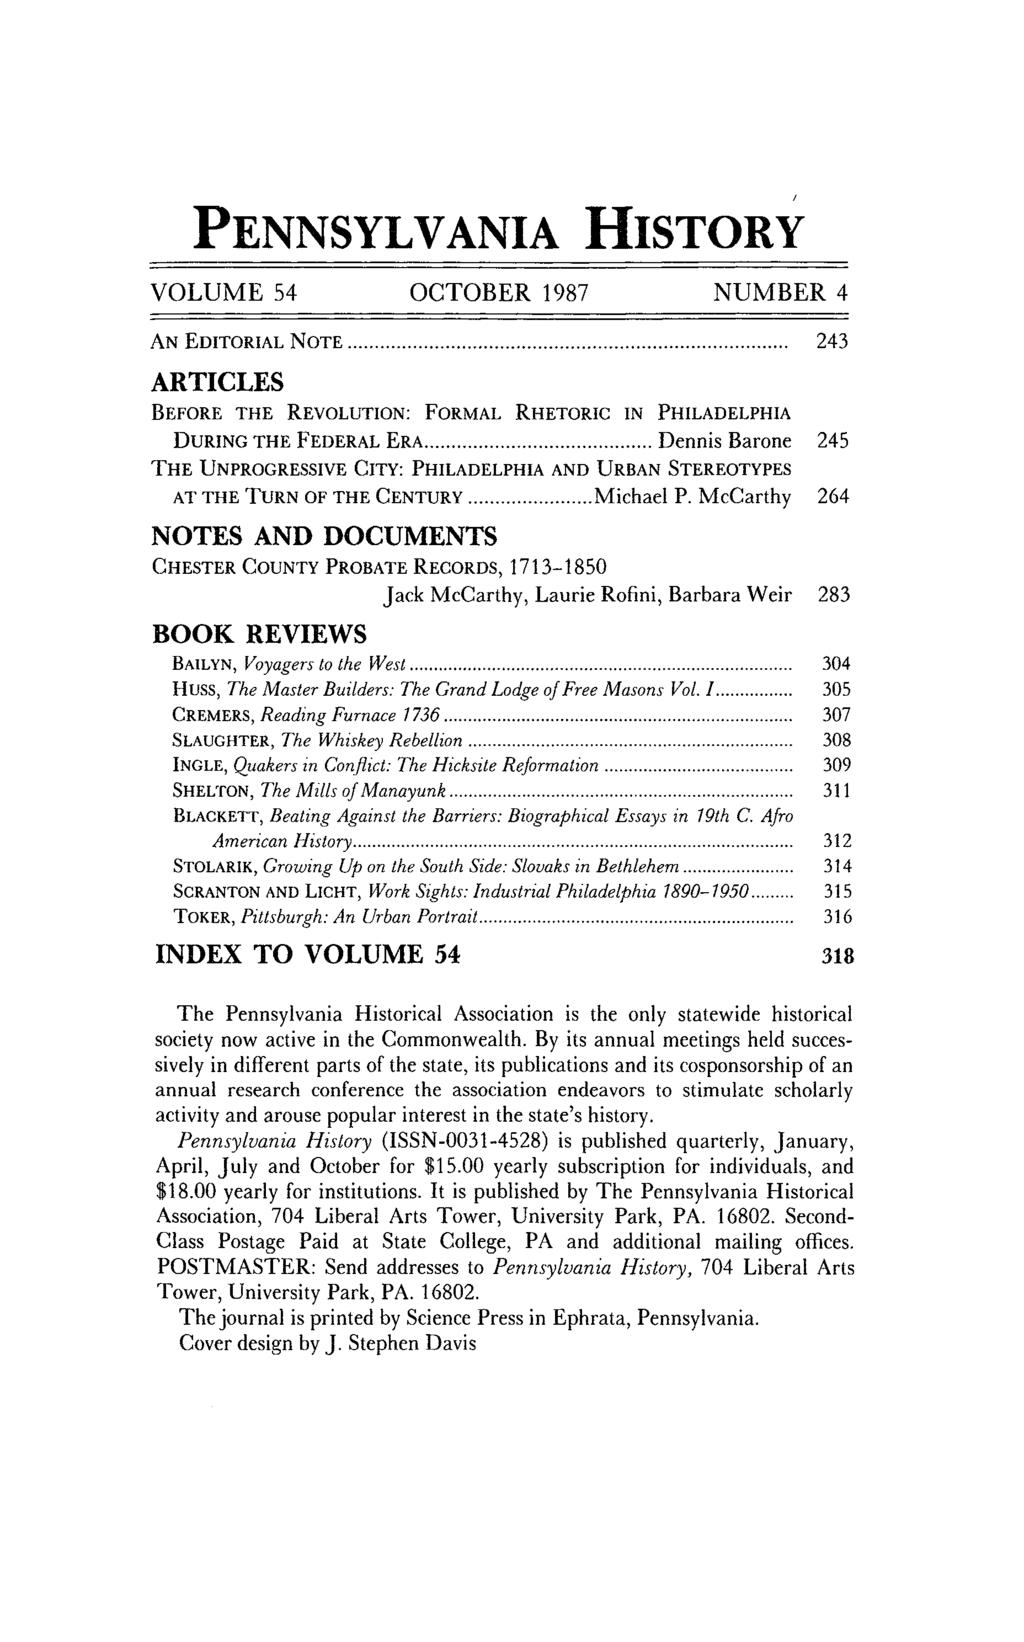 PENNSYLVANIA HISTORY VOLUME 54 OCTOBER 1987 NUMBER 4 AN EDITORIAL NOTE... 243 ARTICLES BEFORE THE REVOLUTION: FORMAL RHETORIC IN PHILADELPHIA DURING THE FEDERAL ERA.